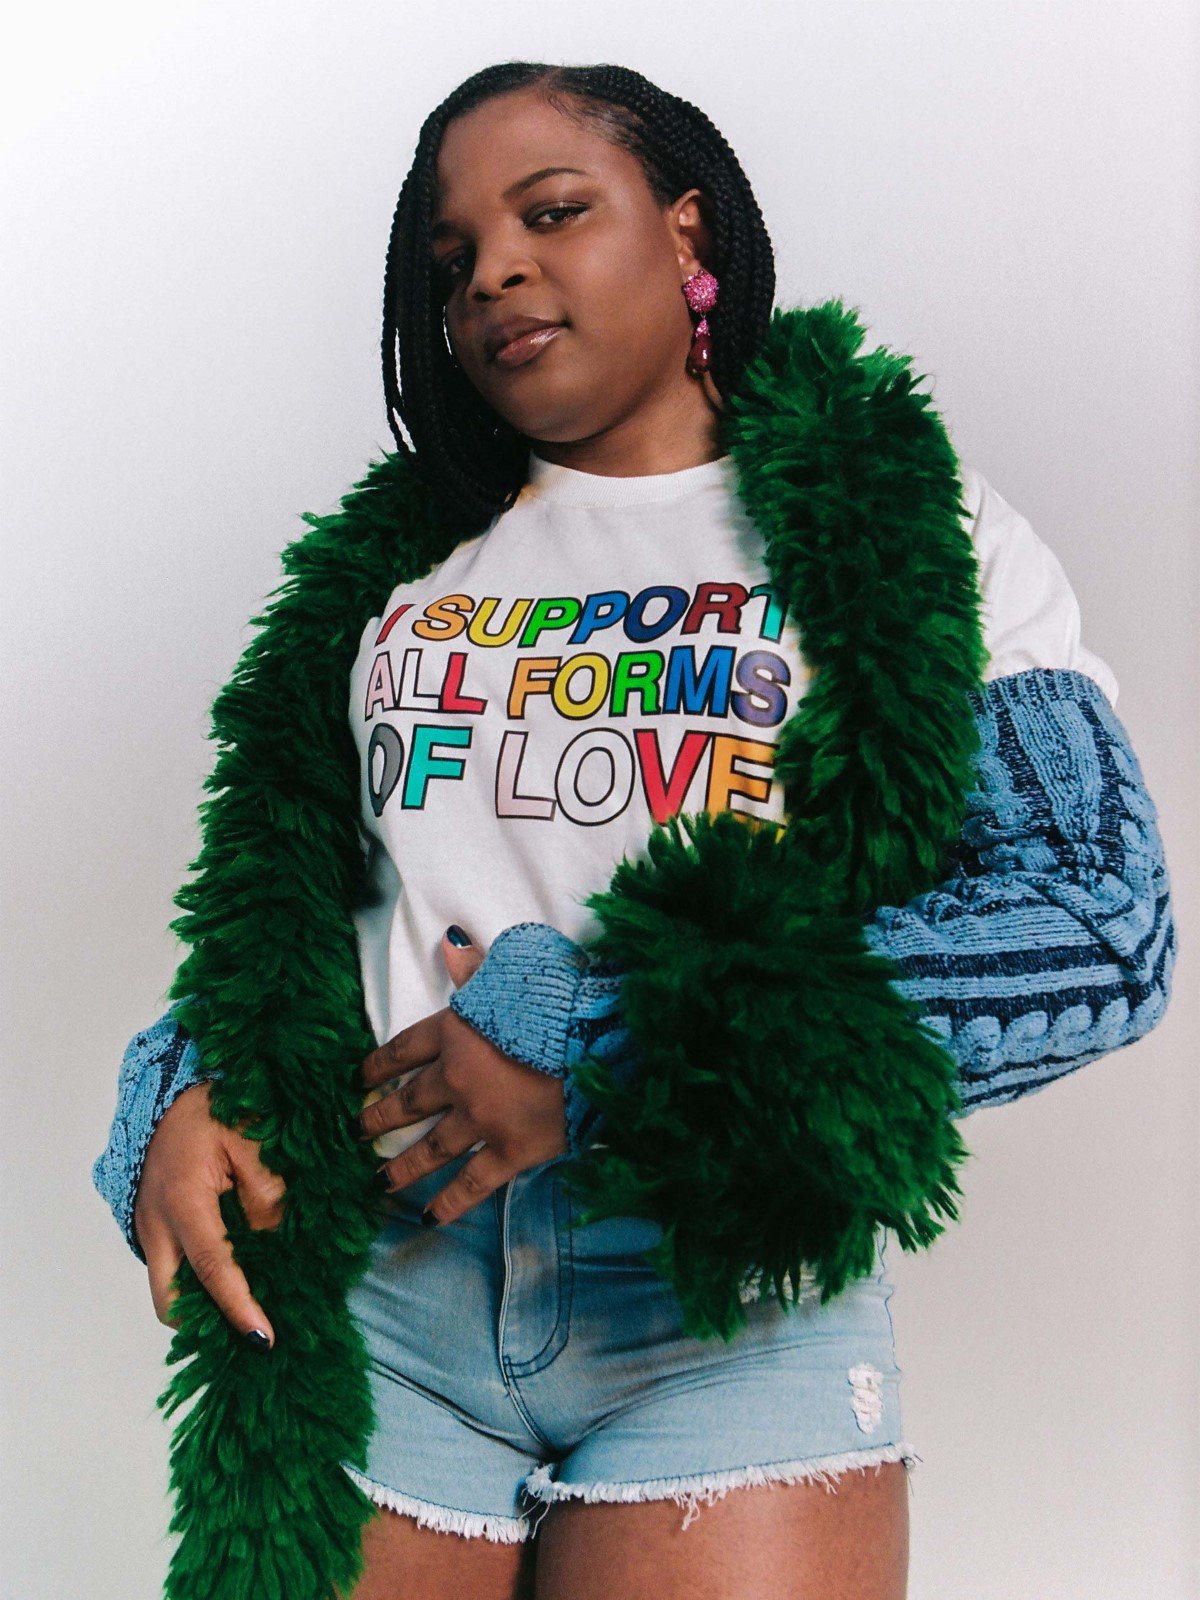 Off-White - "I Support All Forms of Love" Collection